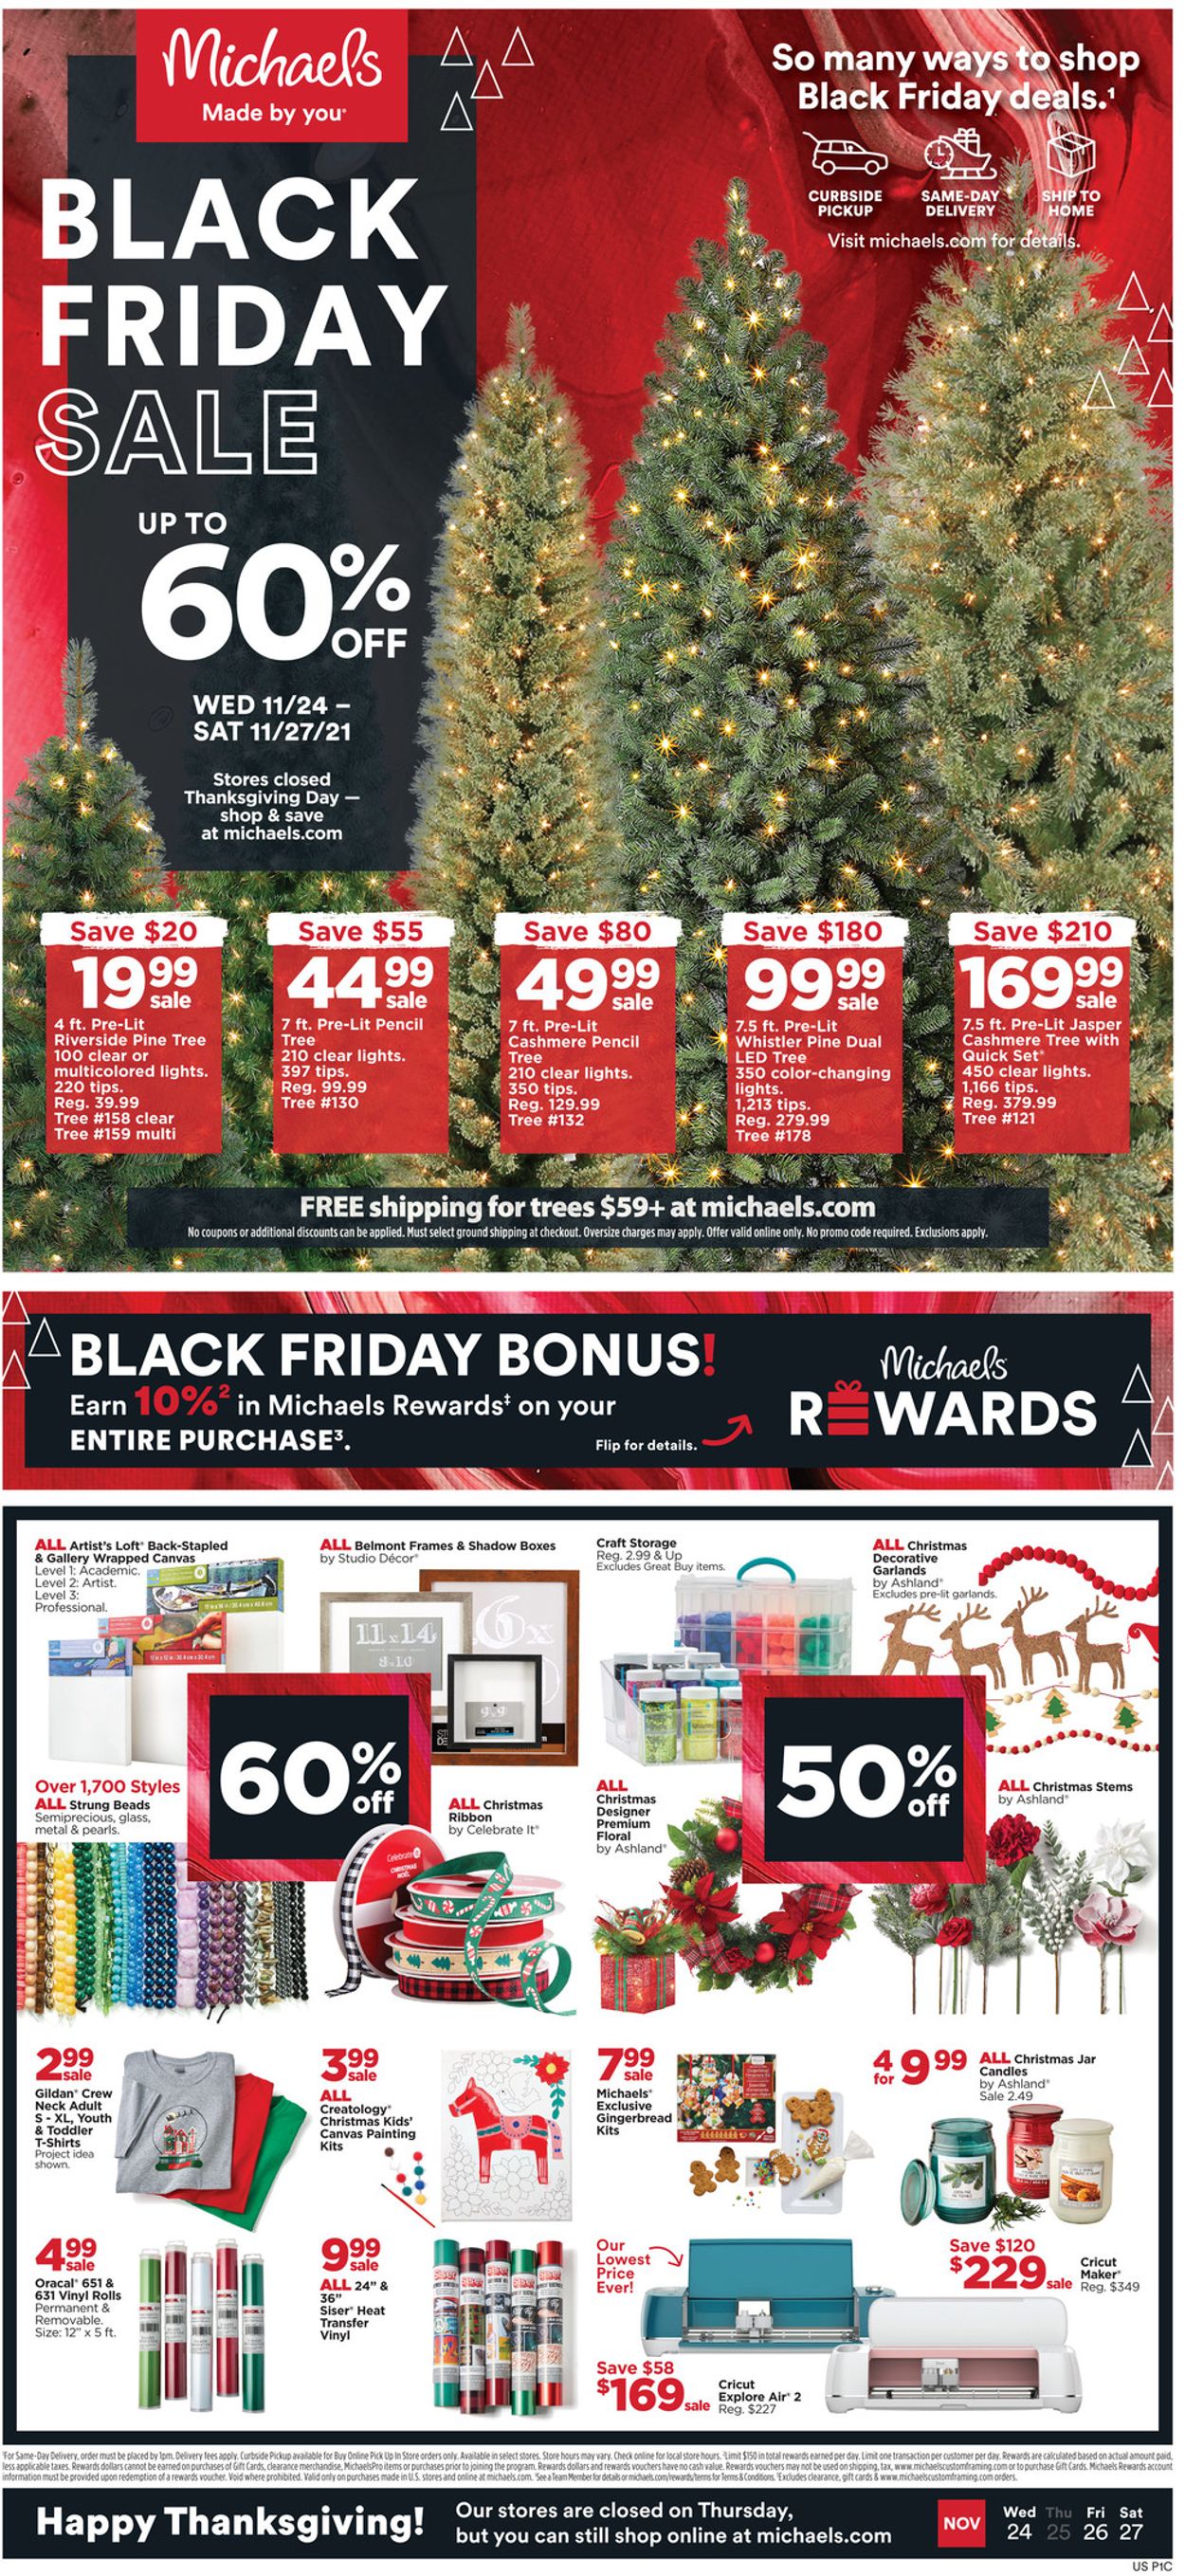 Michaels BLACK FRIDAY 2021 Current weekly ad 11/24 11/27/2021